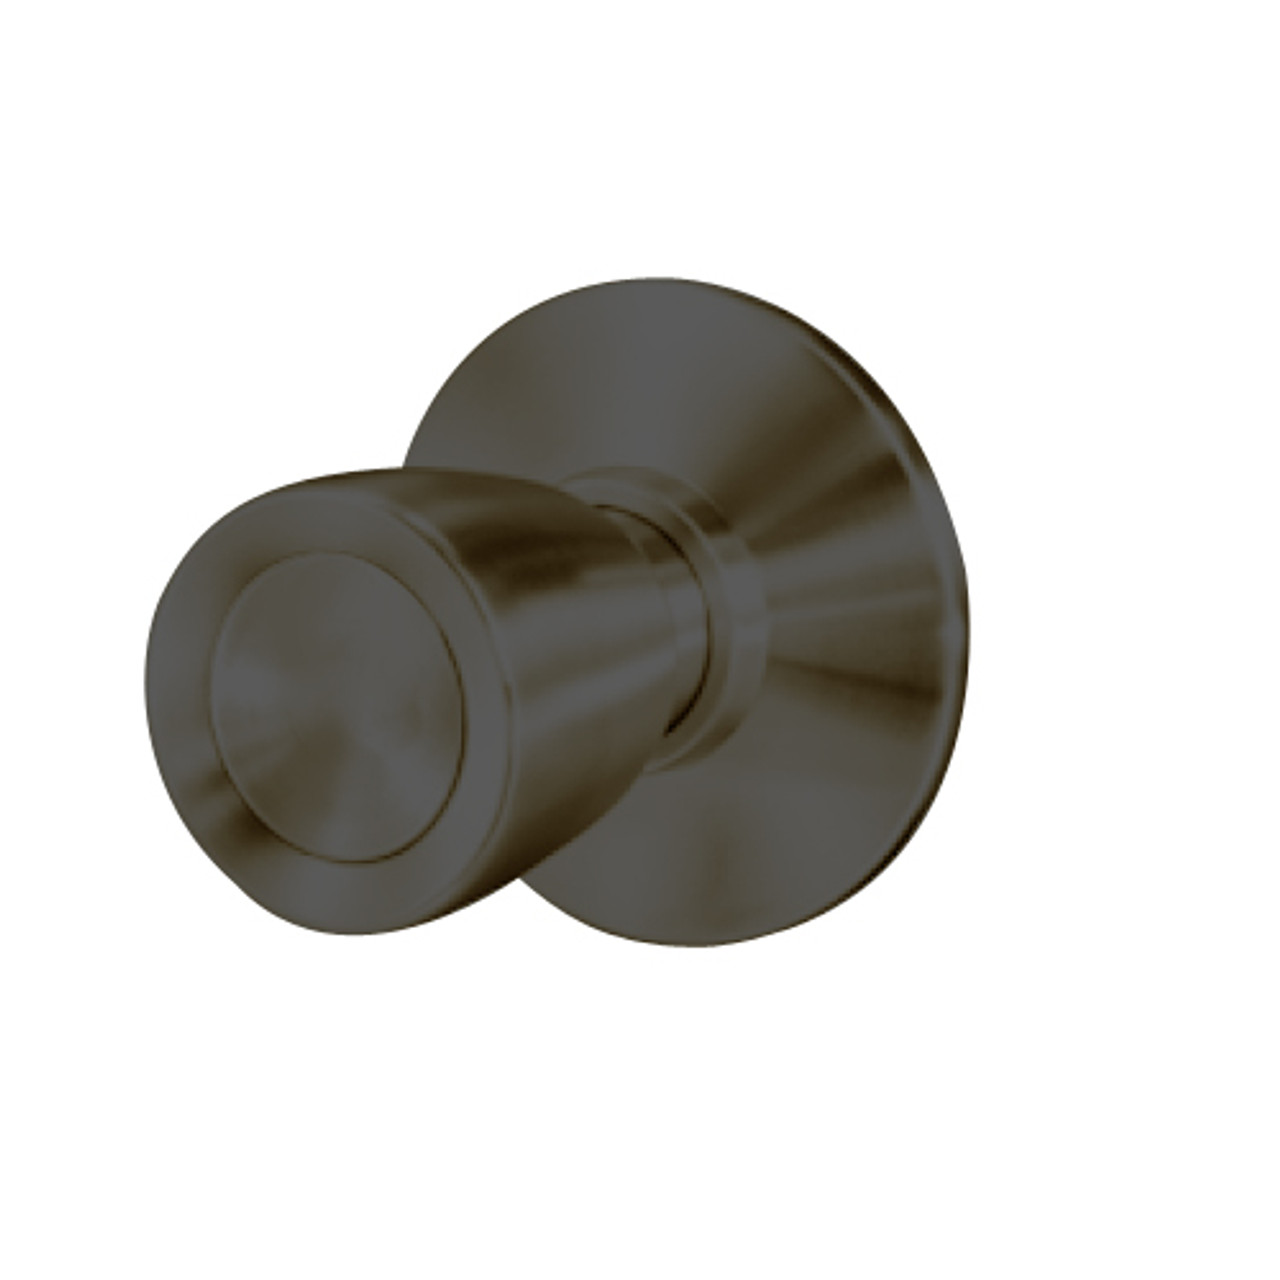 8K30Q6DSTK613 Best 8K Series Exit Heavy Duty Cylindrical Knob Locks with Tulip Style in Oil Rubbed Bronze